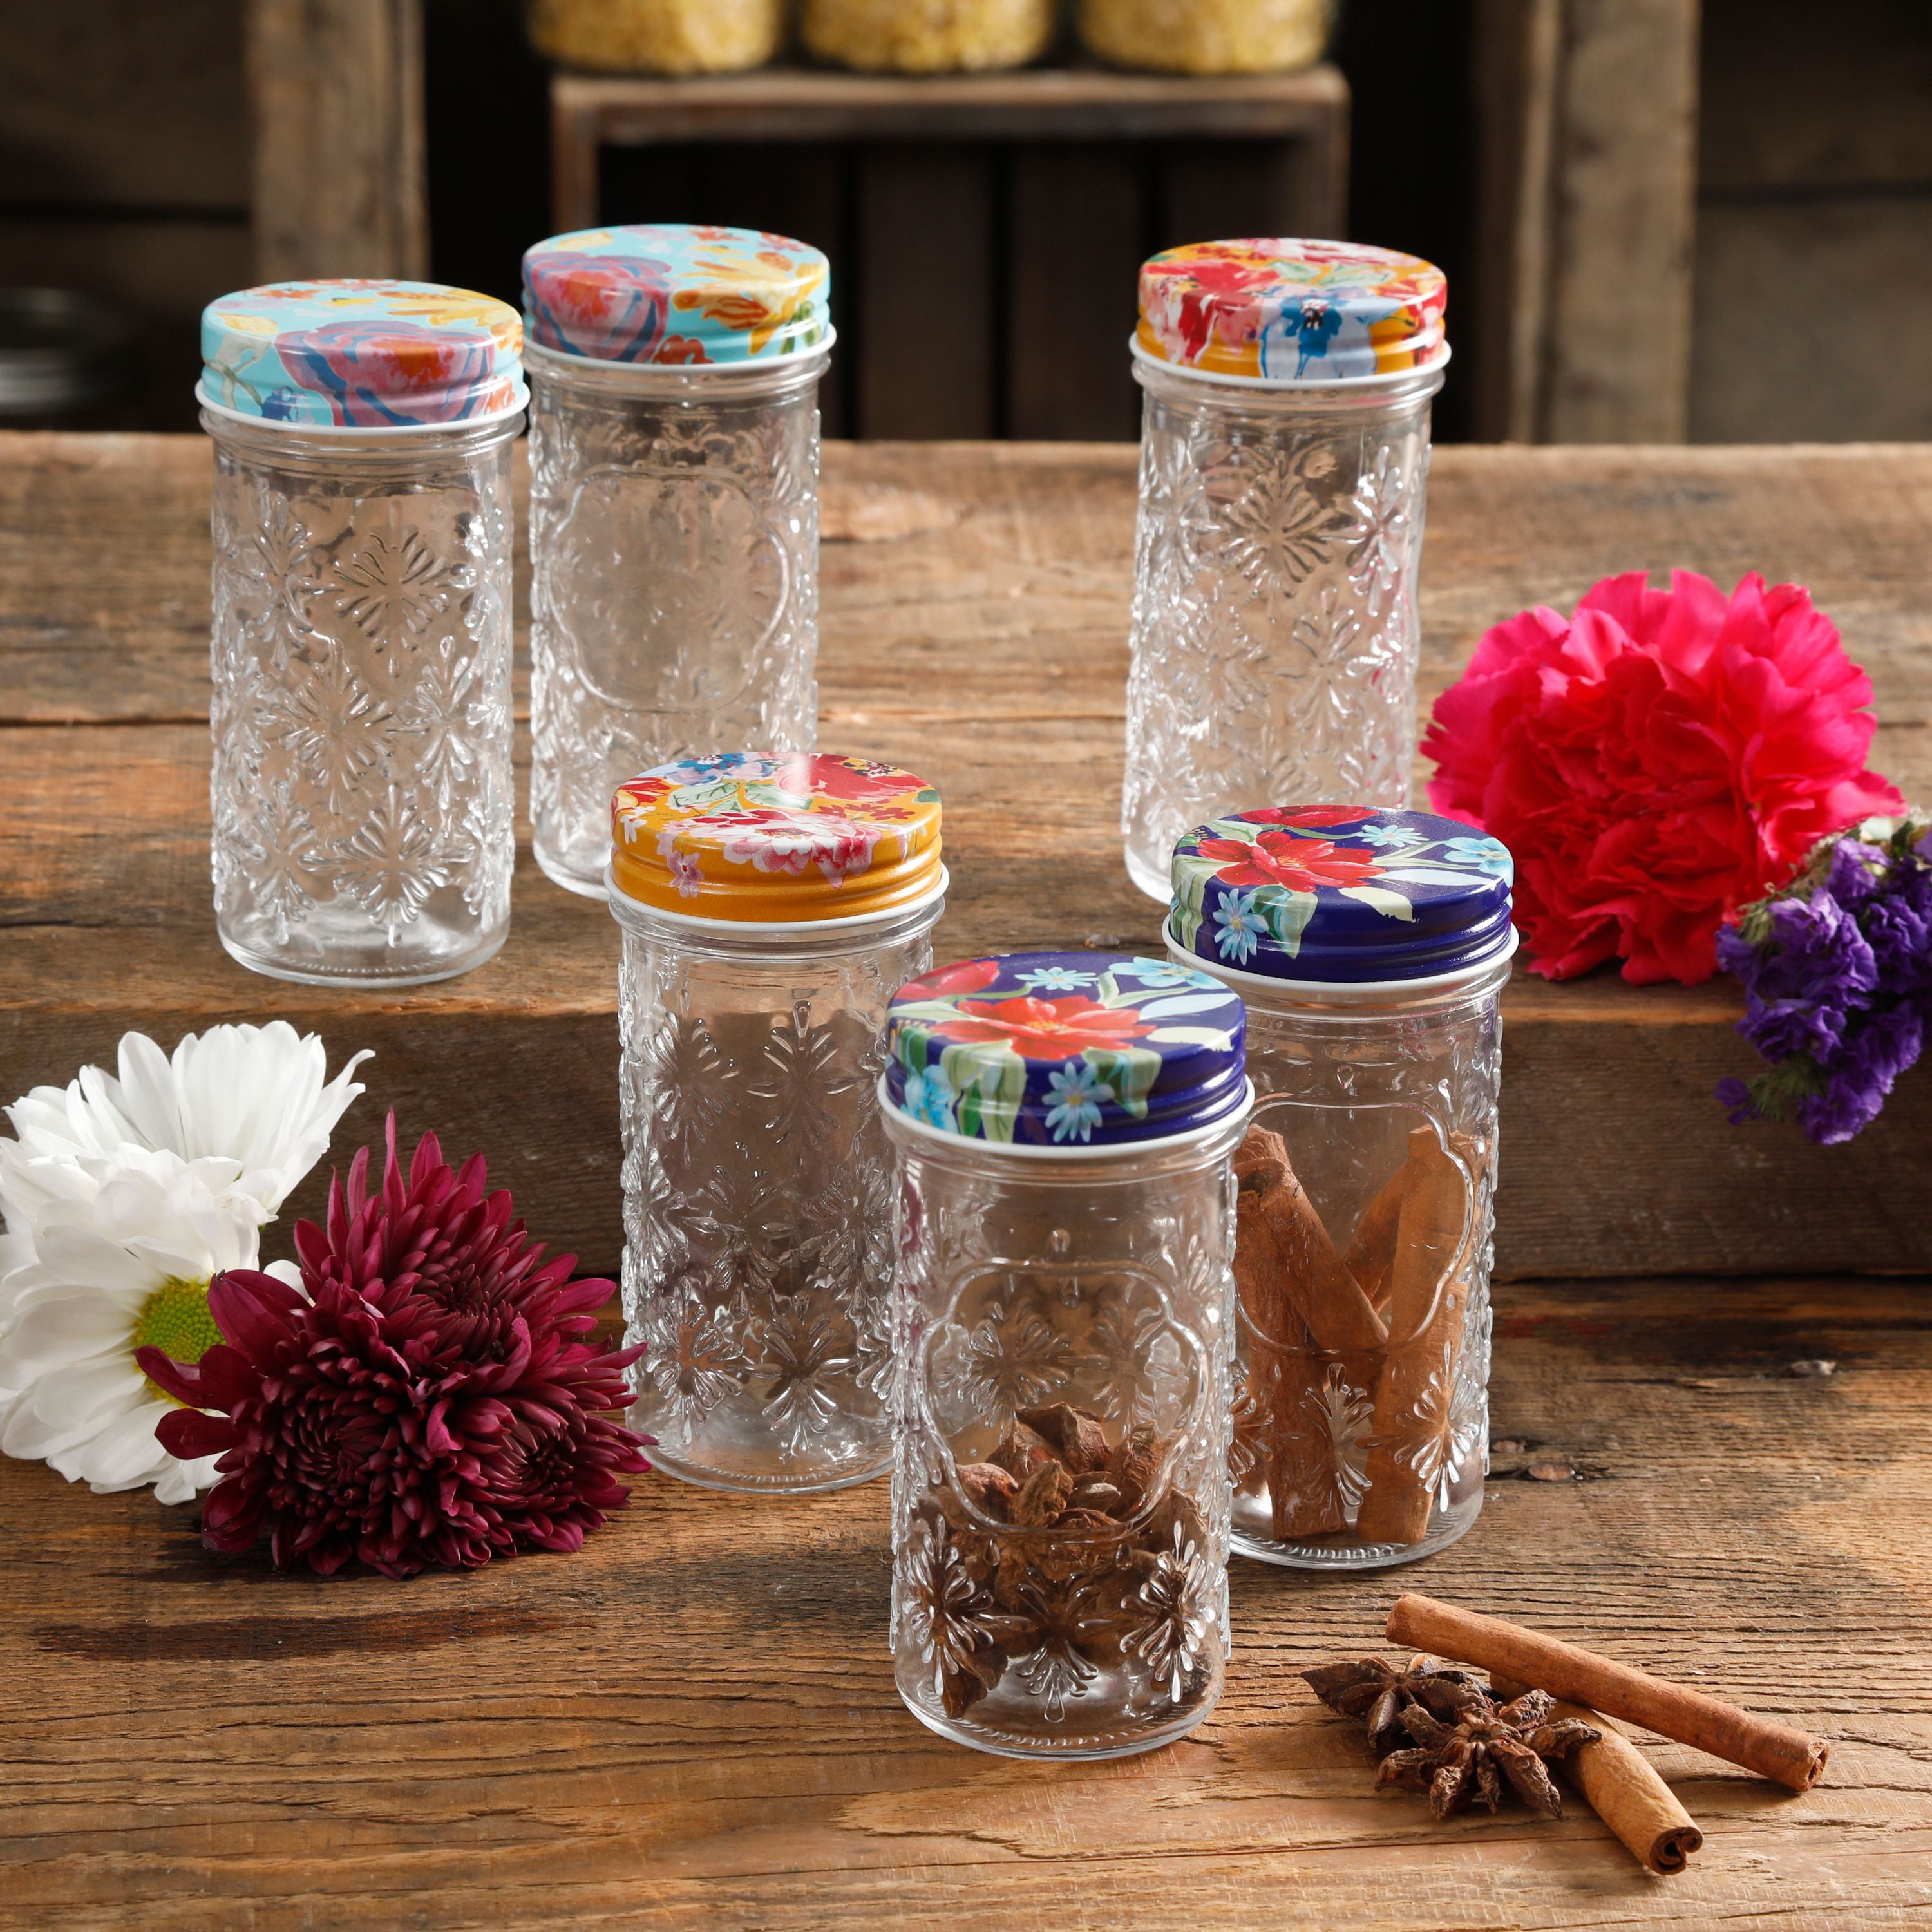 NWT THE PIONEER WOMAN FLORAL MEDLEY 3 Pc SPICE JARS WITH LIDS Mini